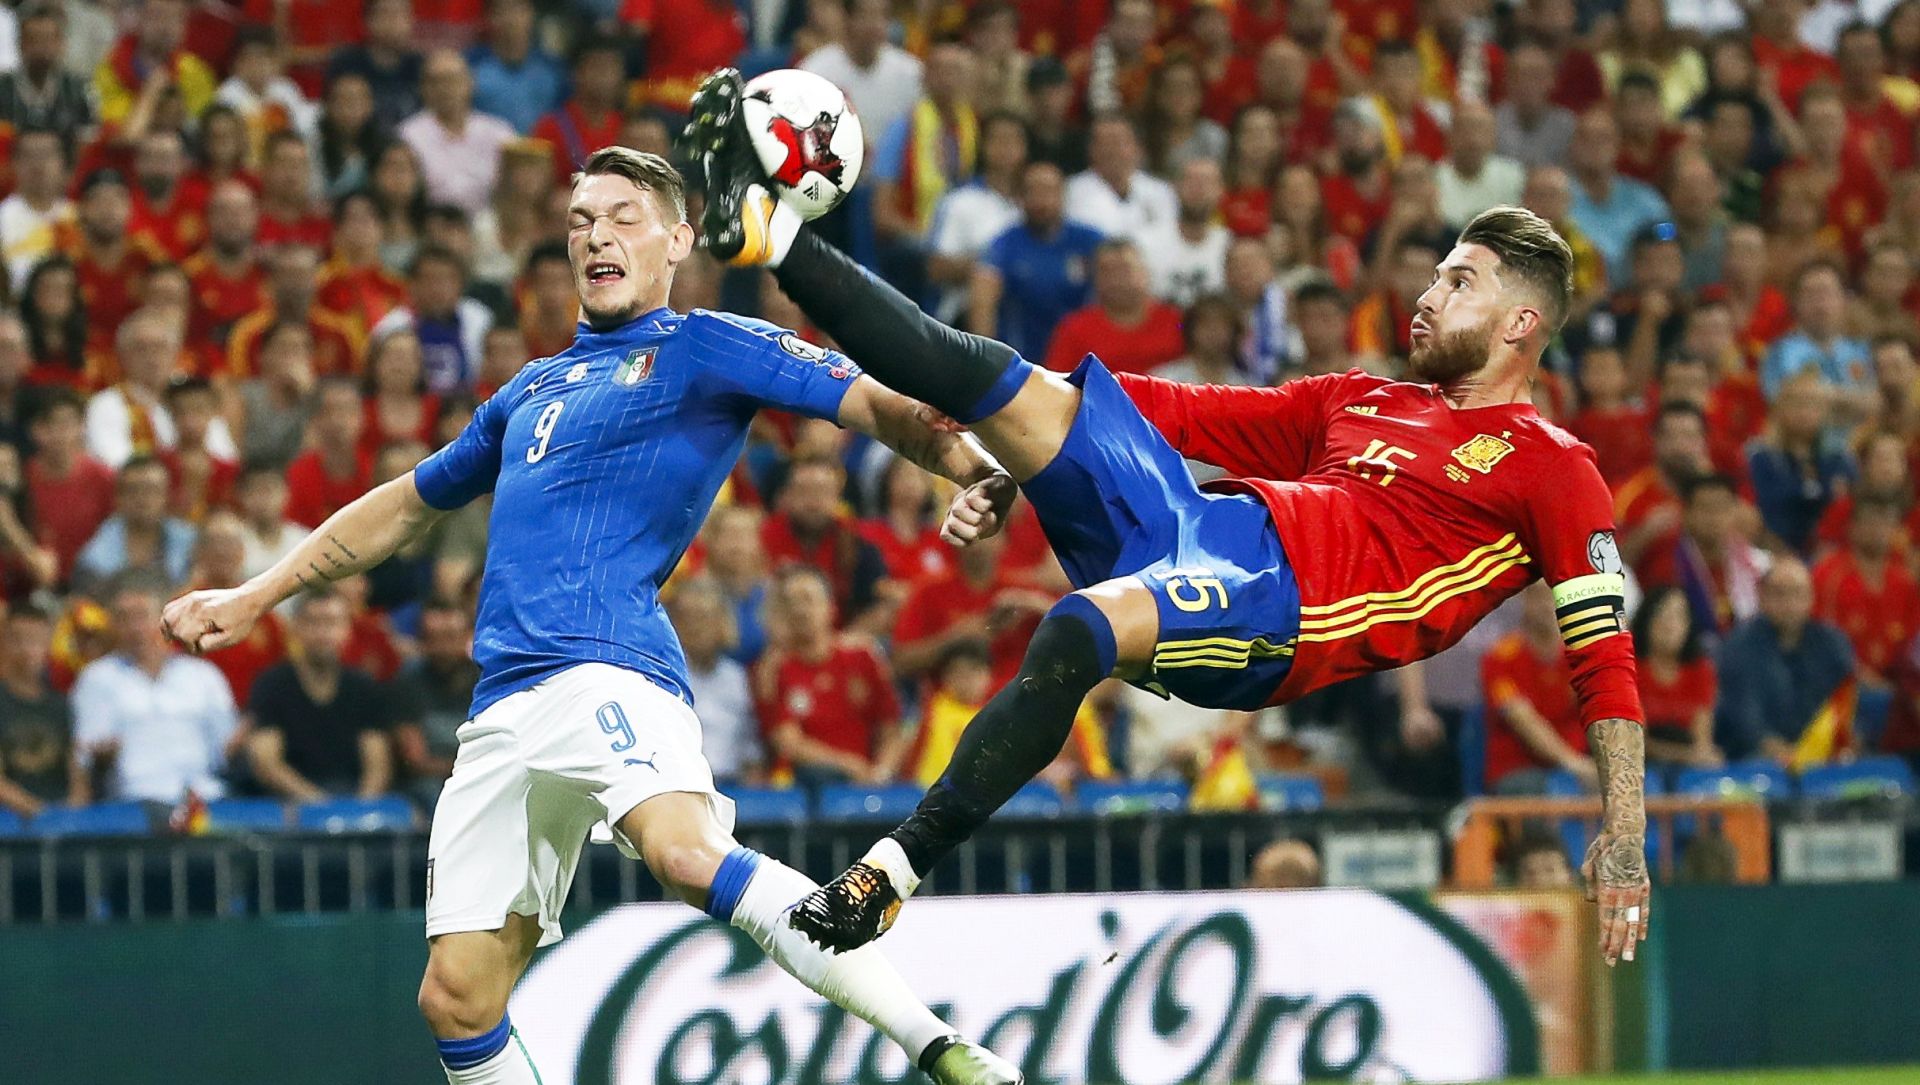 epa06179906 Italy's Andrea Belotti (L) in action against Spain's Sergio Ramos (R) during the FIFA World Cup 2018 qualifying soccer match between Spain and Italy at the Santiago Bernabeu stadium in Madrid, Spain, 02 September 2017.  EPA/JUANJO MARTIN